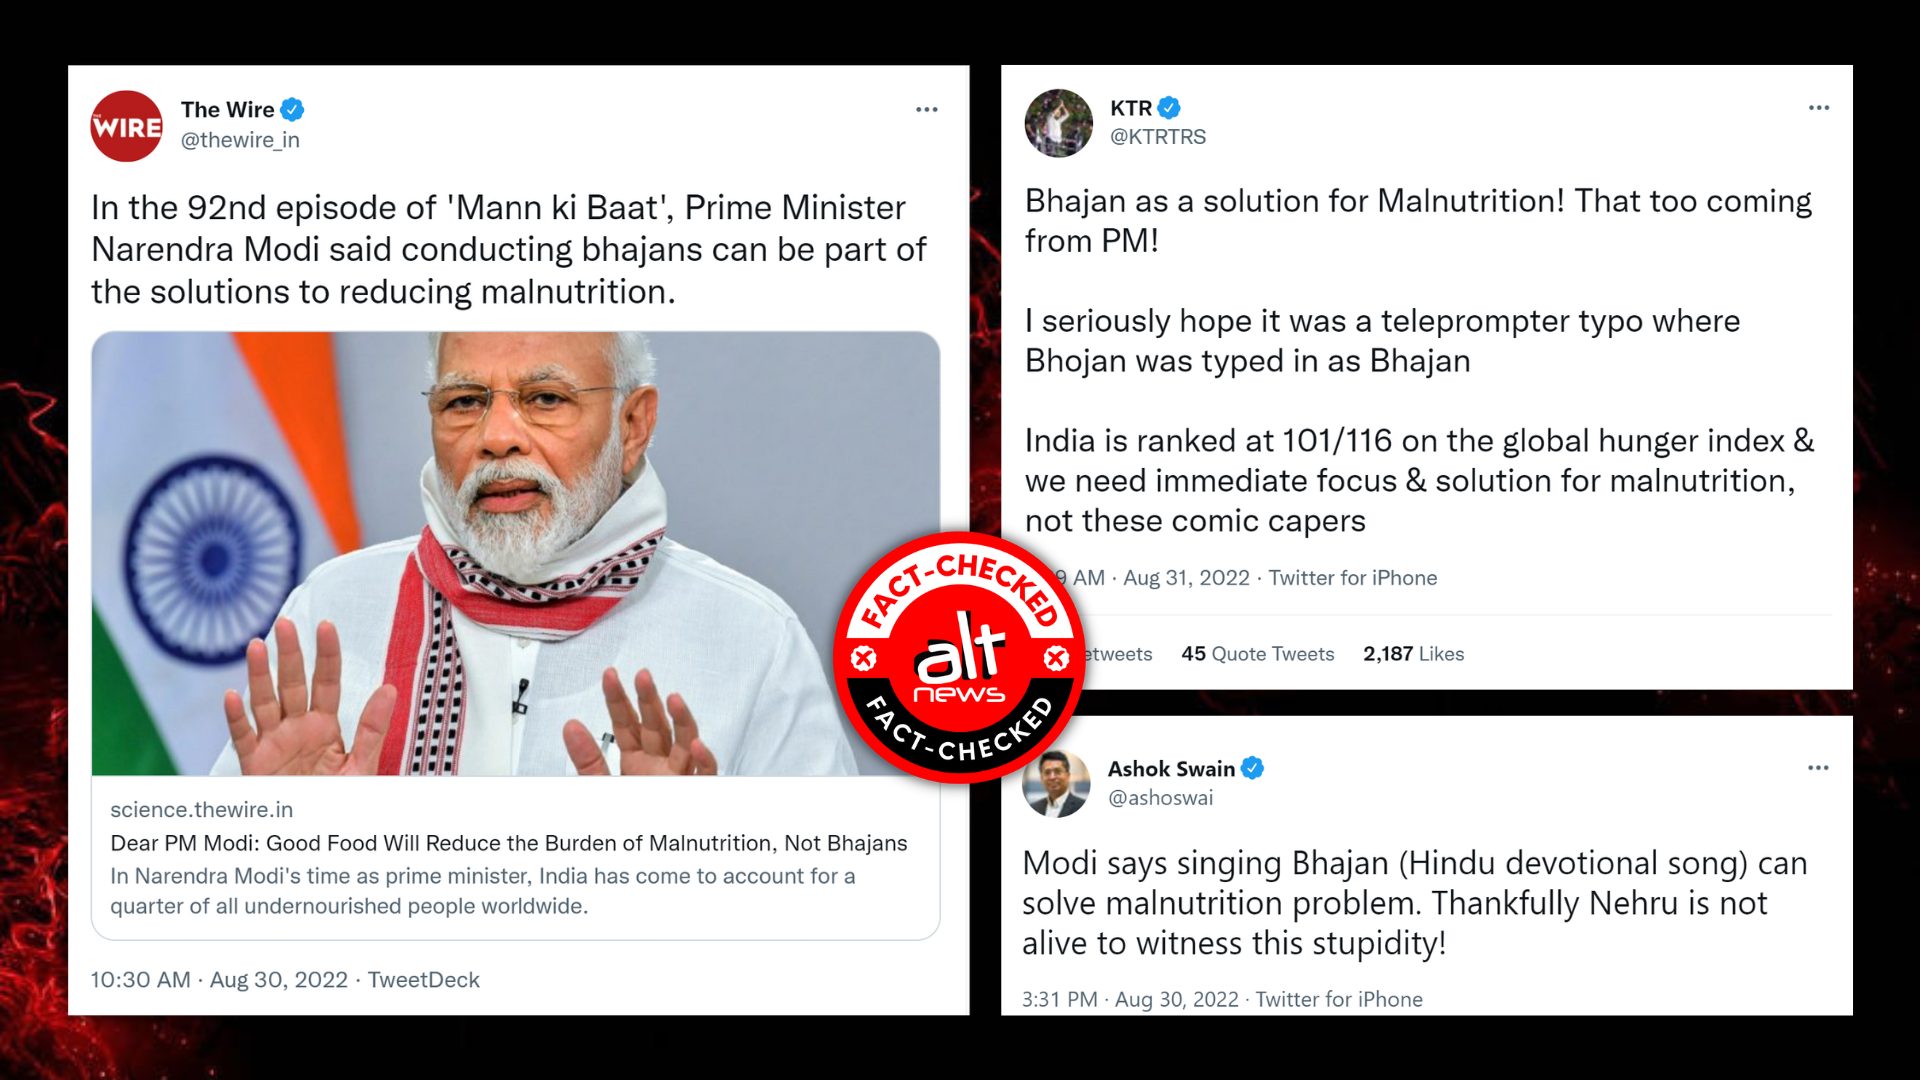 Fact-Check: Did PM suggest bhajans could reduce malnutrition? - Alt News